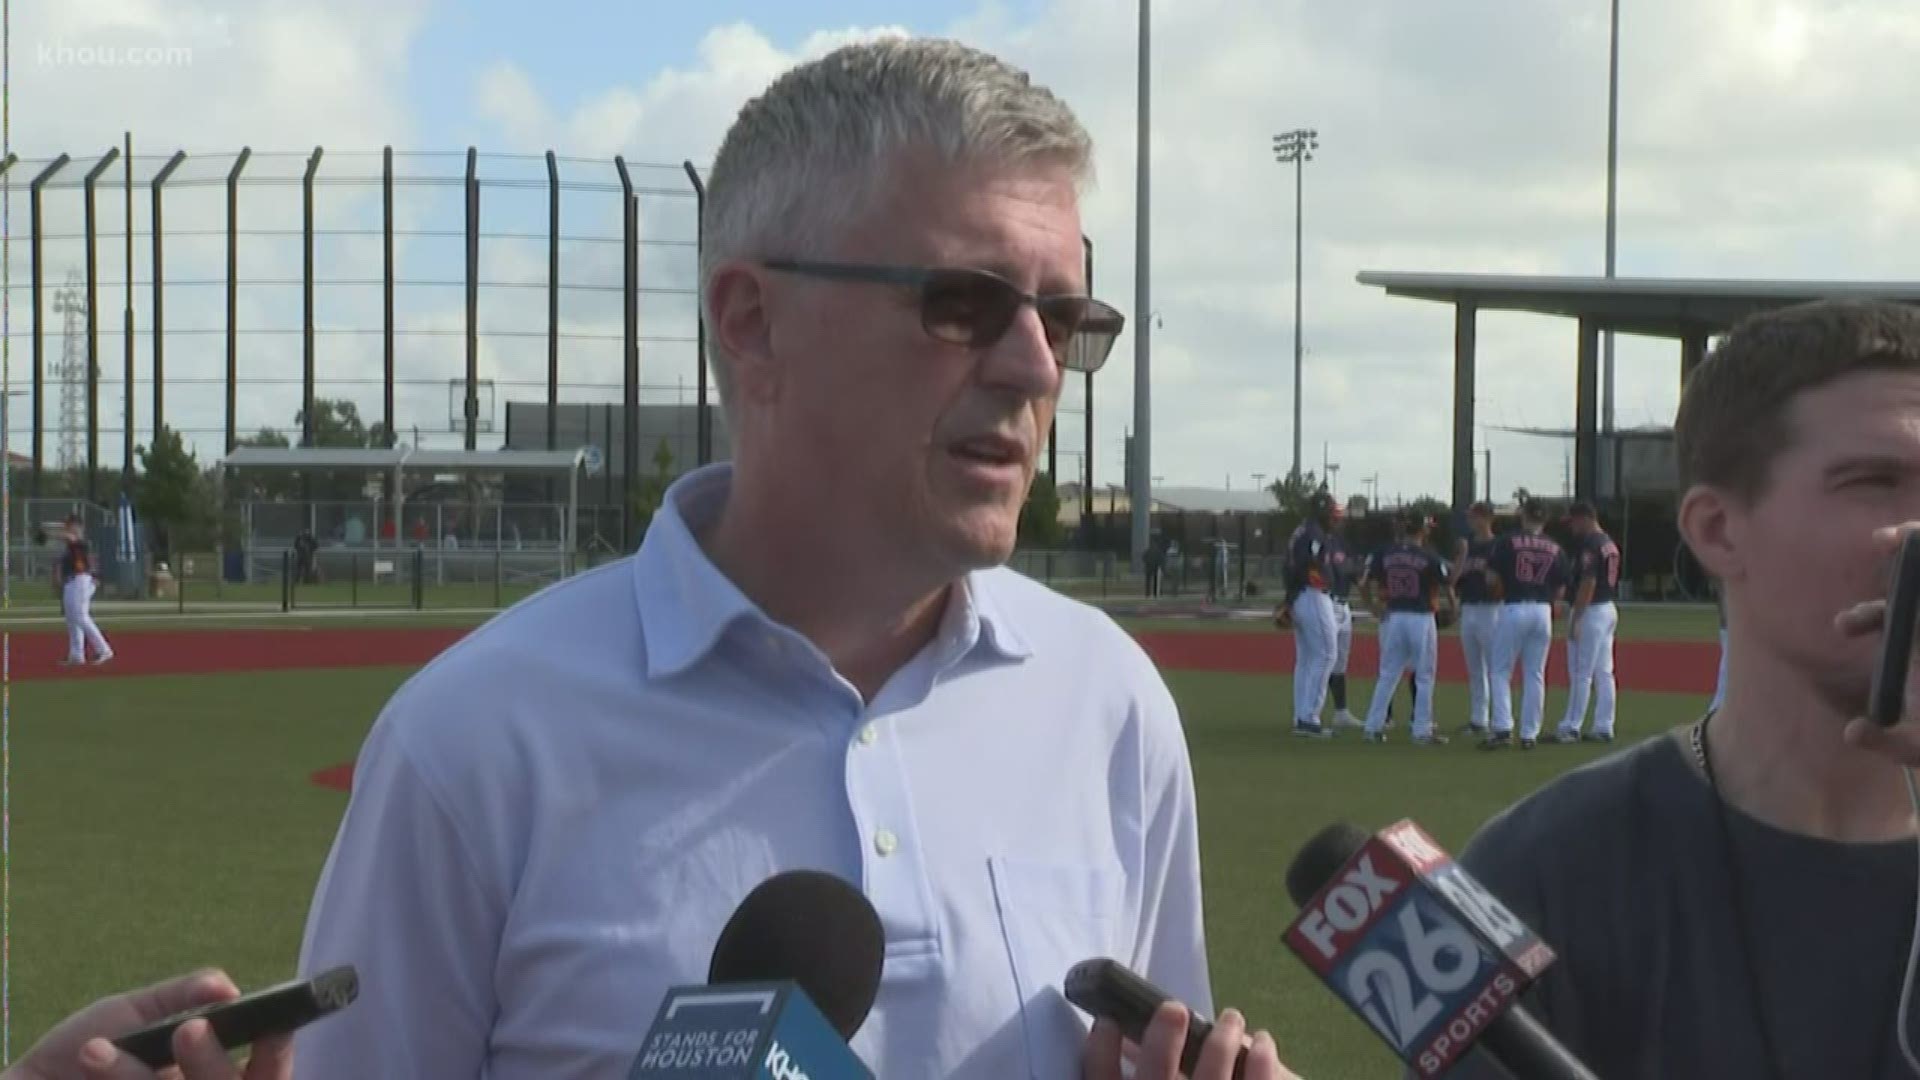 Talk at spring training revolved around free agents, specifically those who are not playing for the Astros.